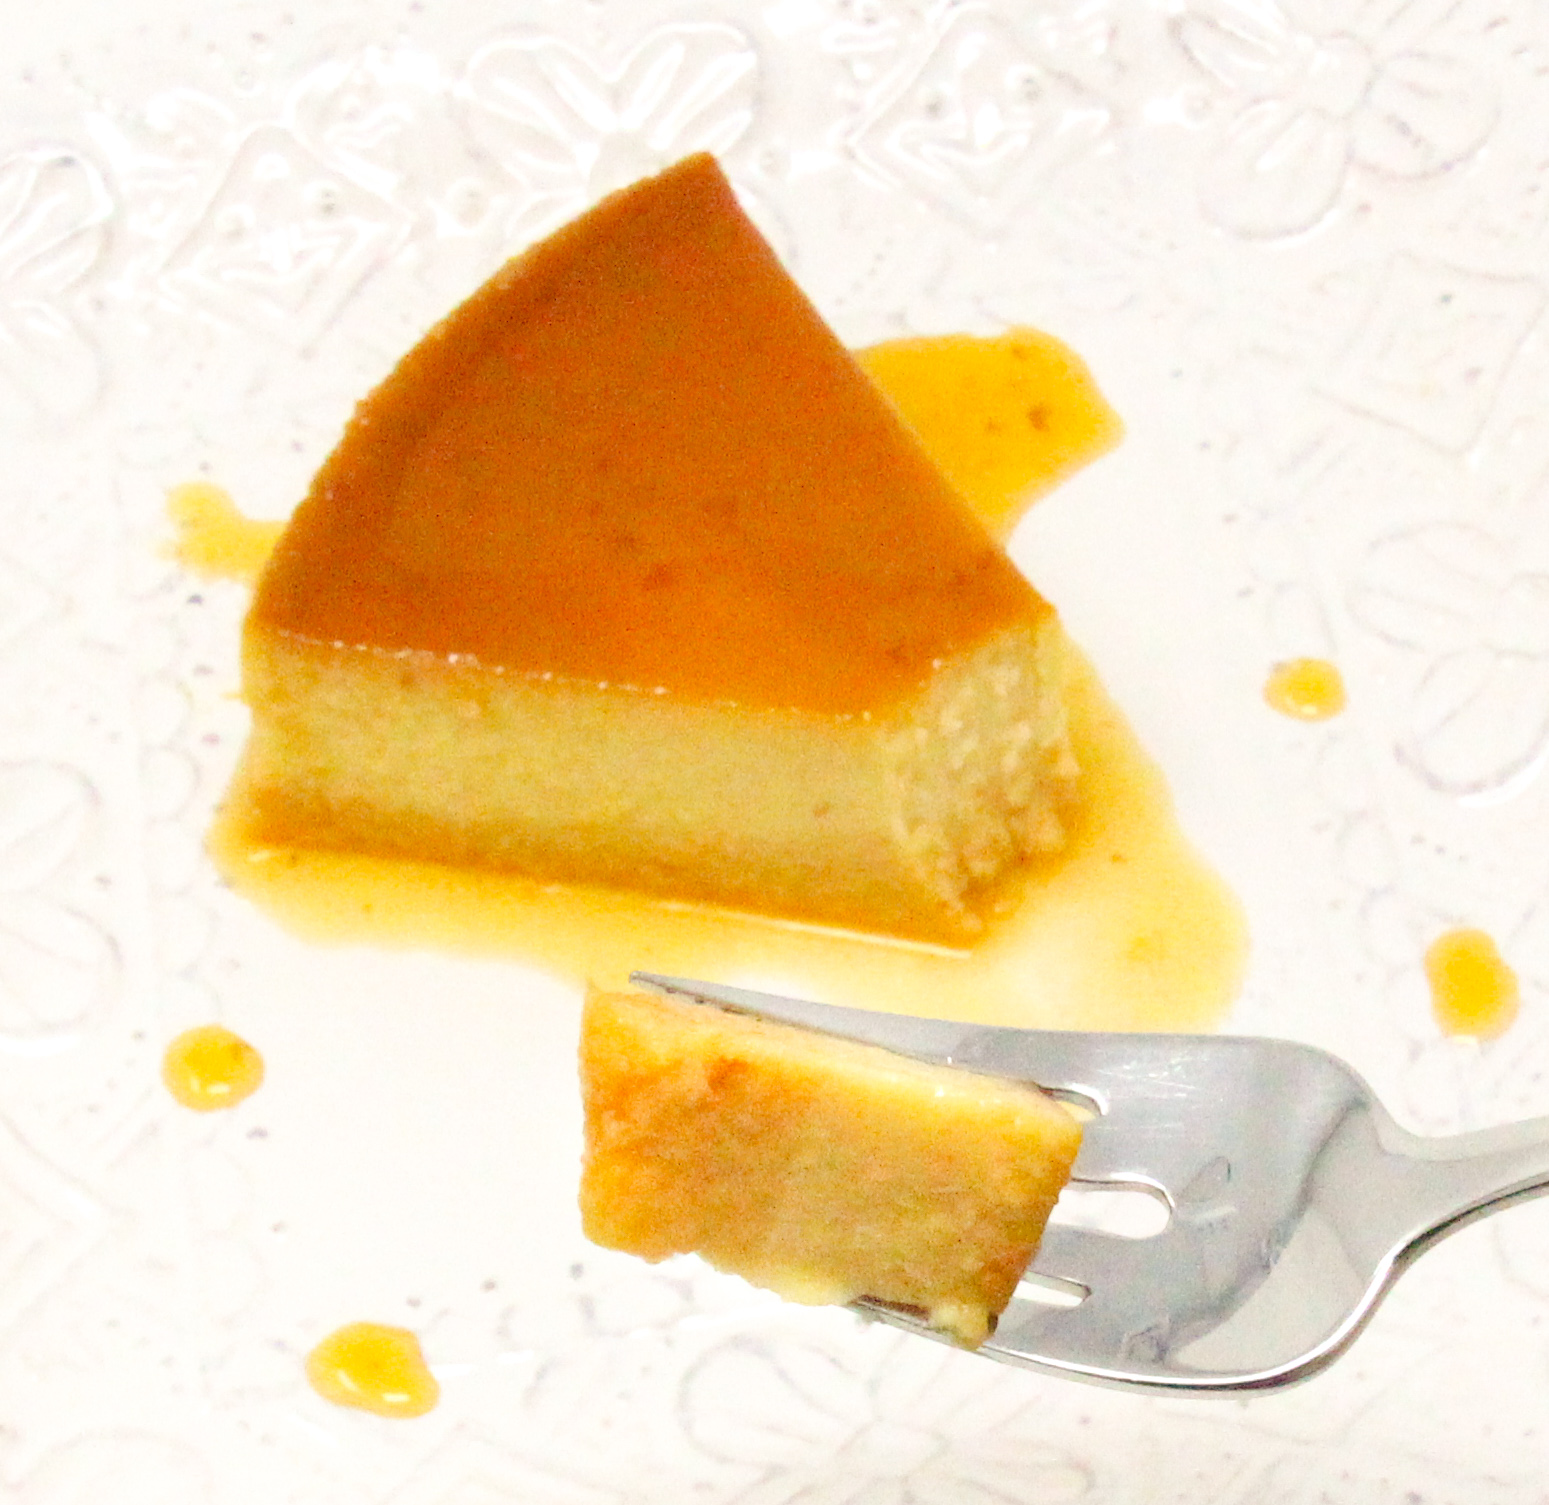 Raquel's Cala-FLAN-za includes a bit of pumpkin and cinnamon stick steeped milk for flavor making this flan every bit as creamy and delectable as what you'd order in a restaurant. Recipe shared with permission granted by Raquel V. Reyes, author of Mango, Mambo, and Murder. 